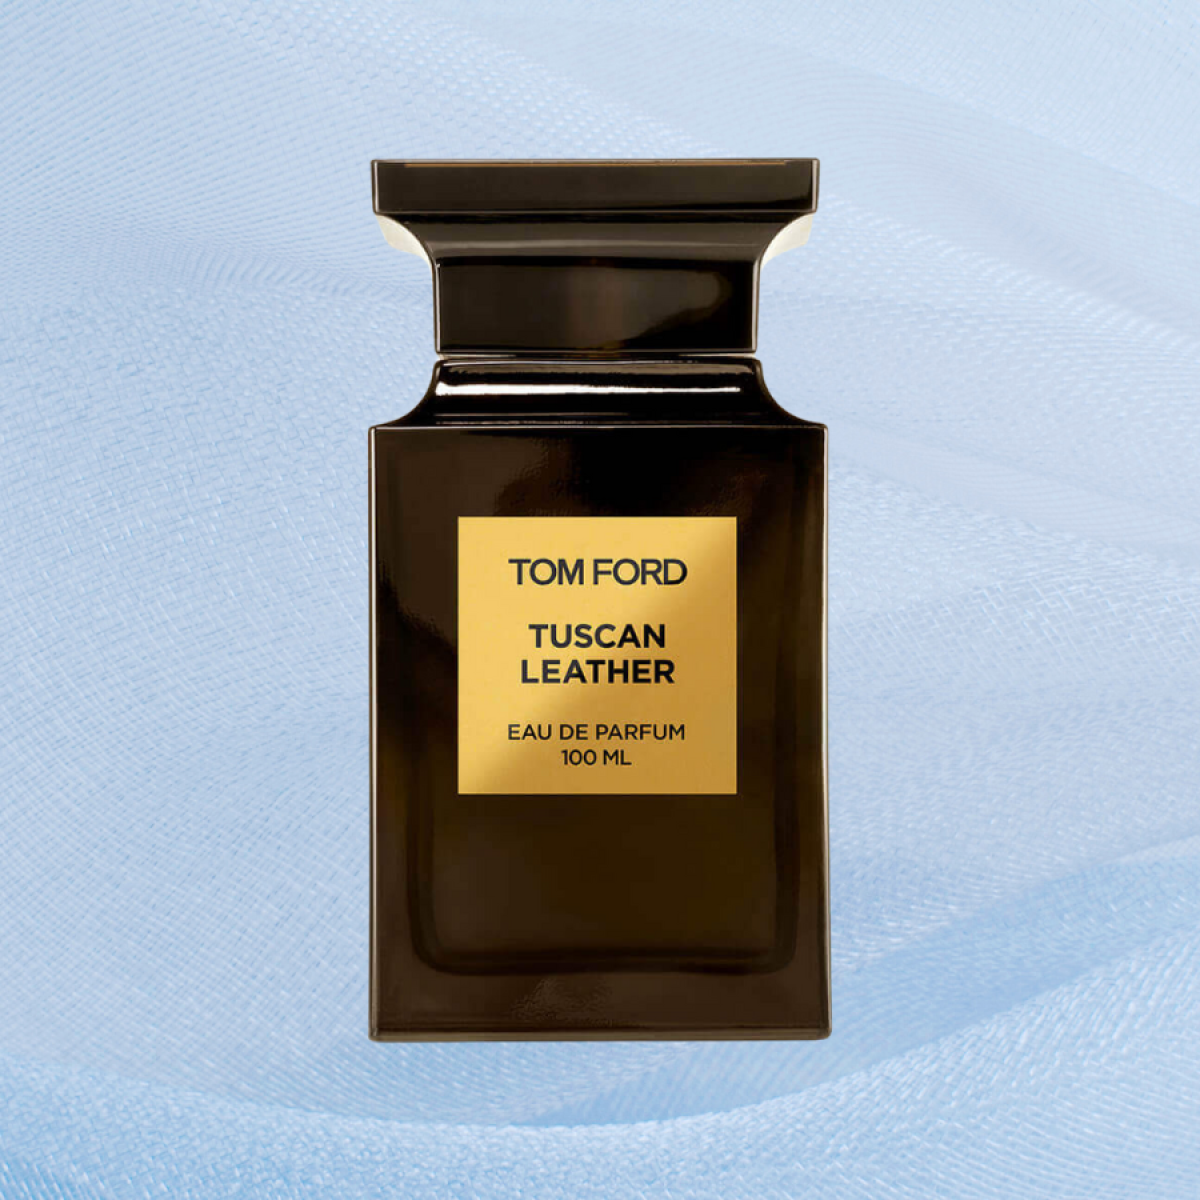 Tom Ford - Tuscan Leather 